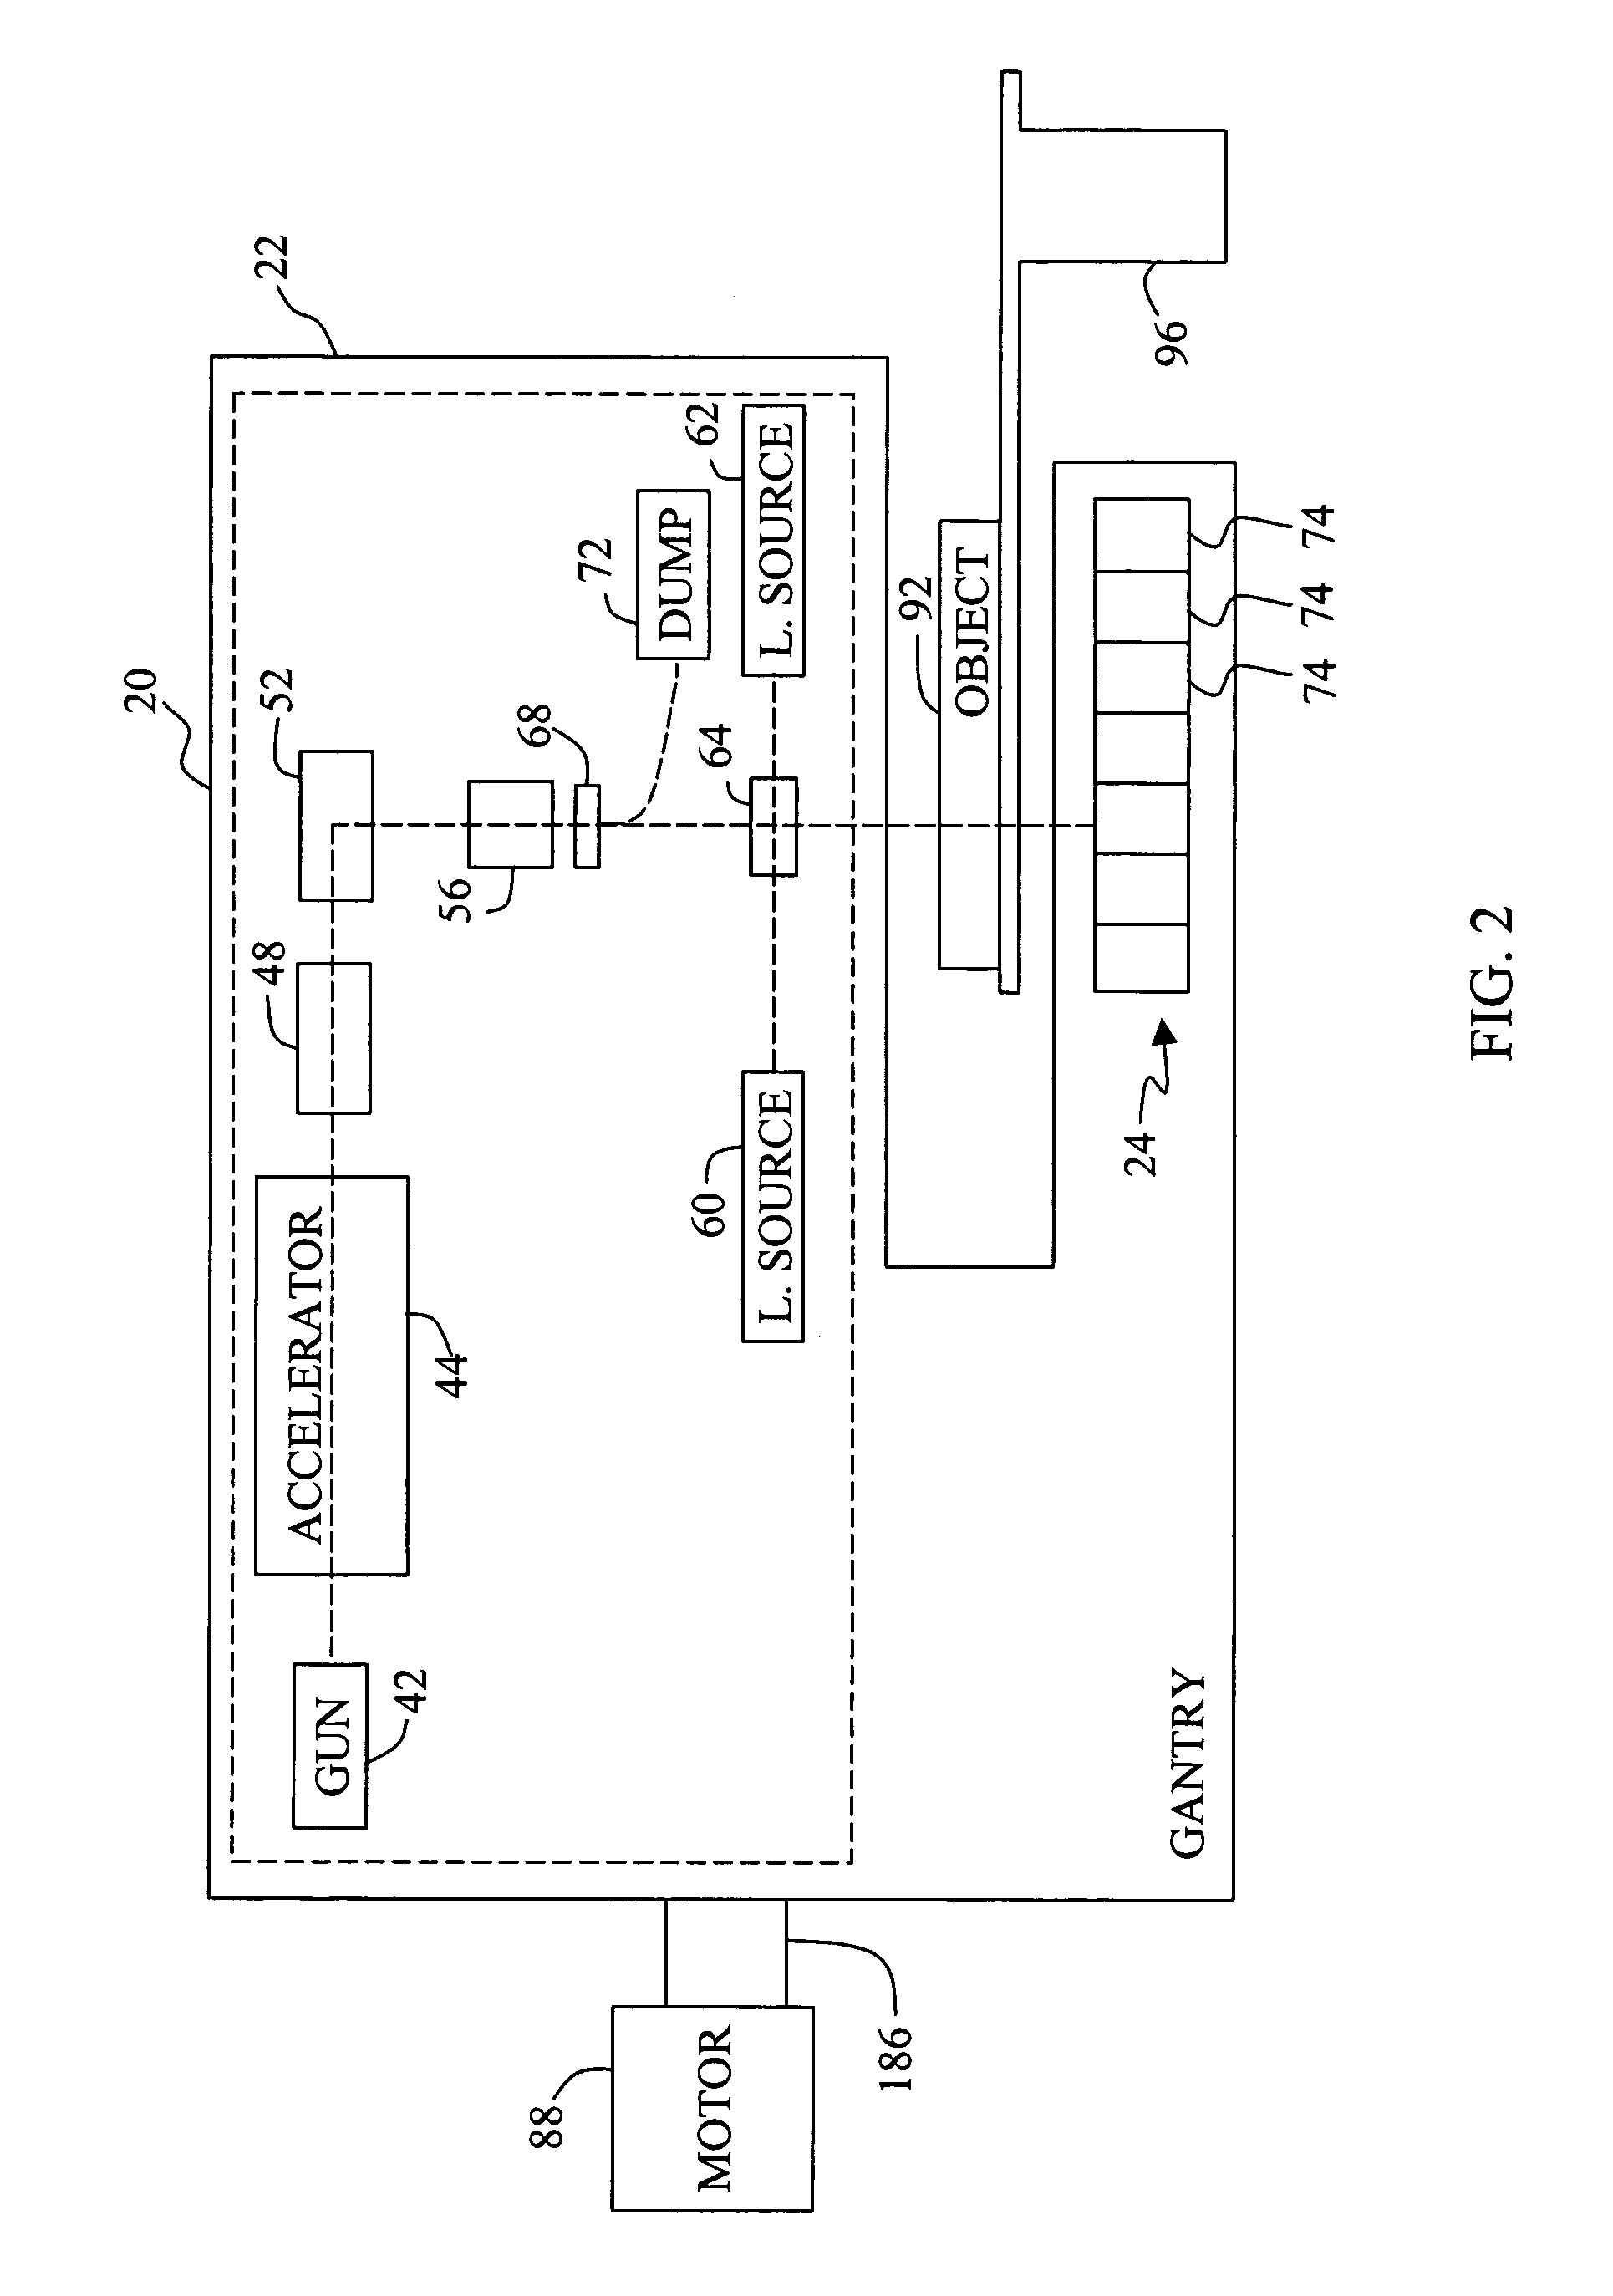 Systems and methods for generating images by using monochromatic x-rays